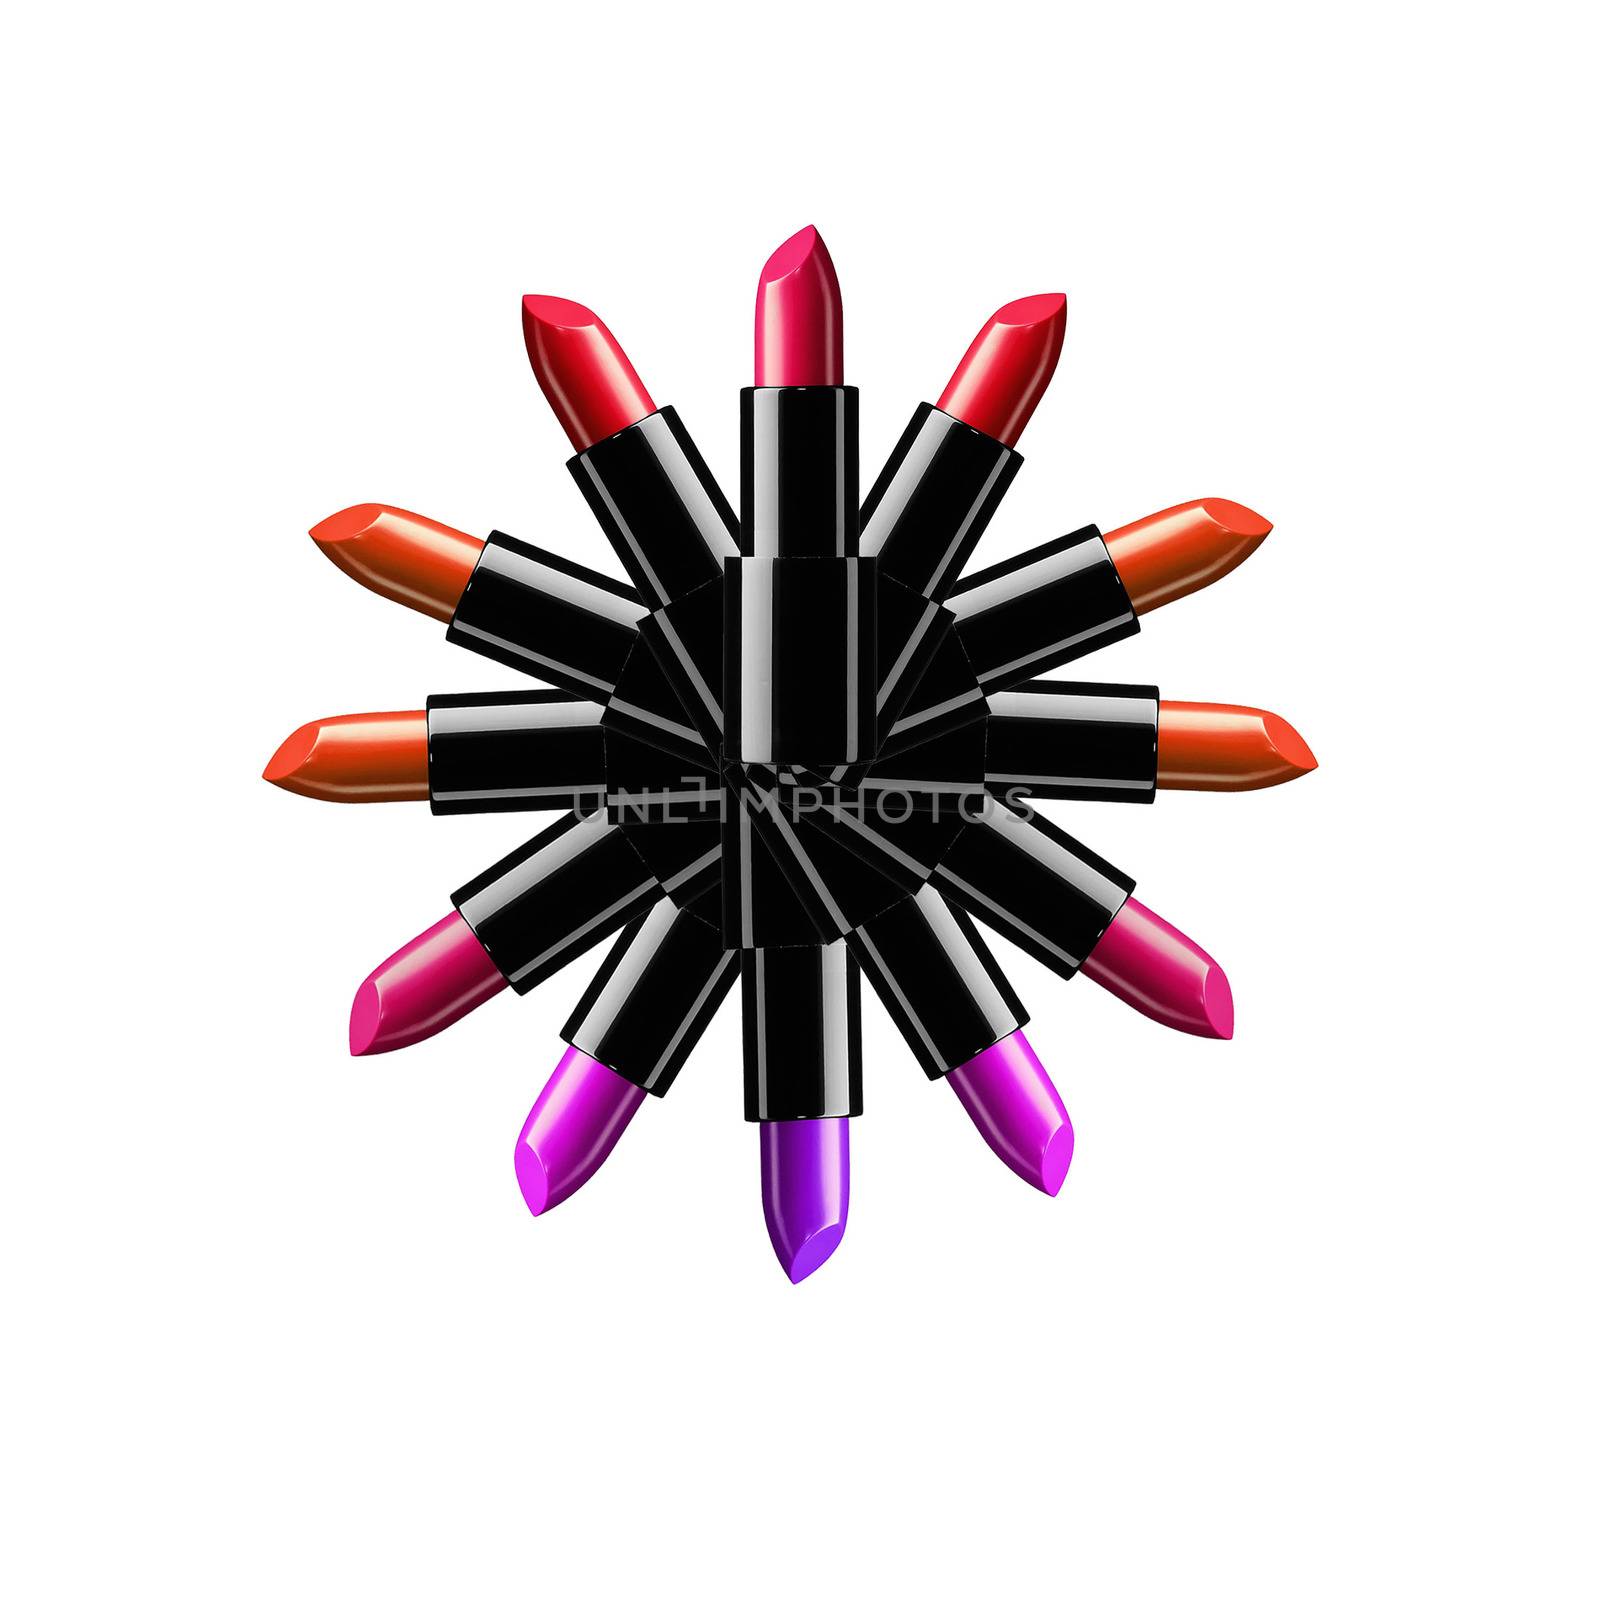 beauty and fashion illustration - cosmetics logo by GGillustrations